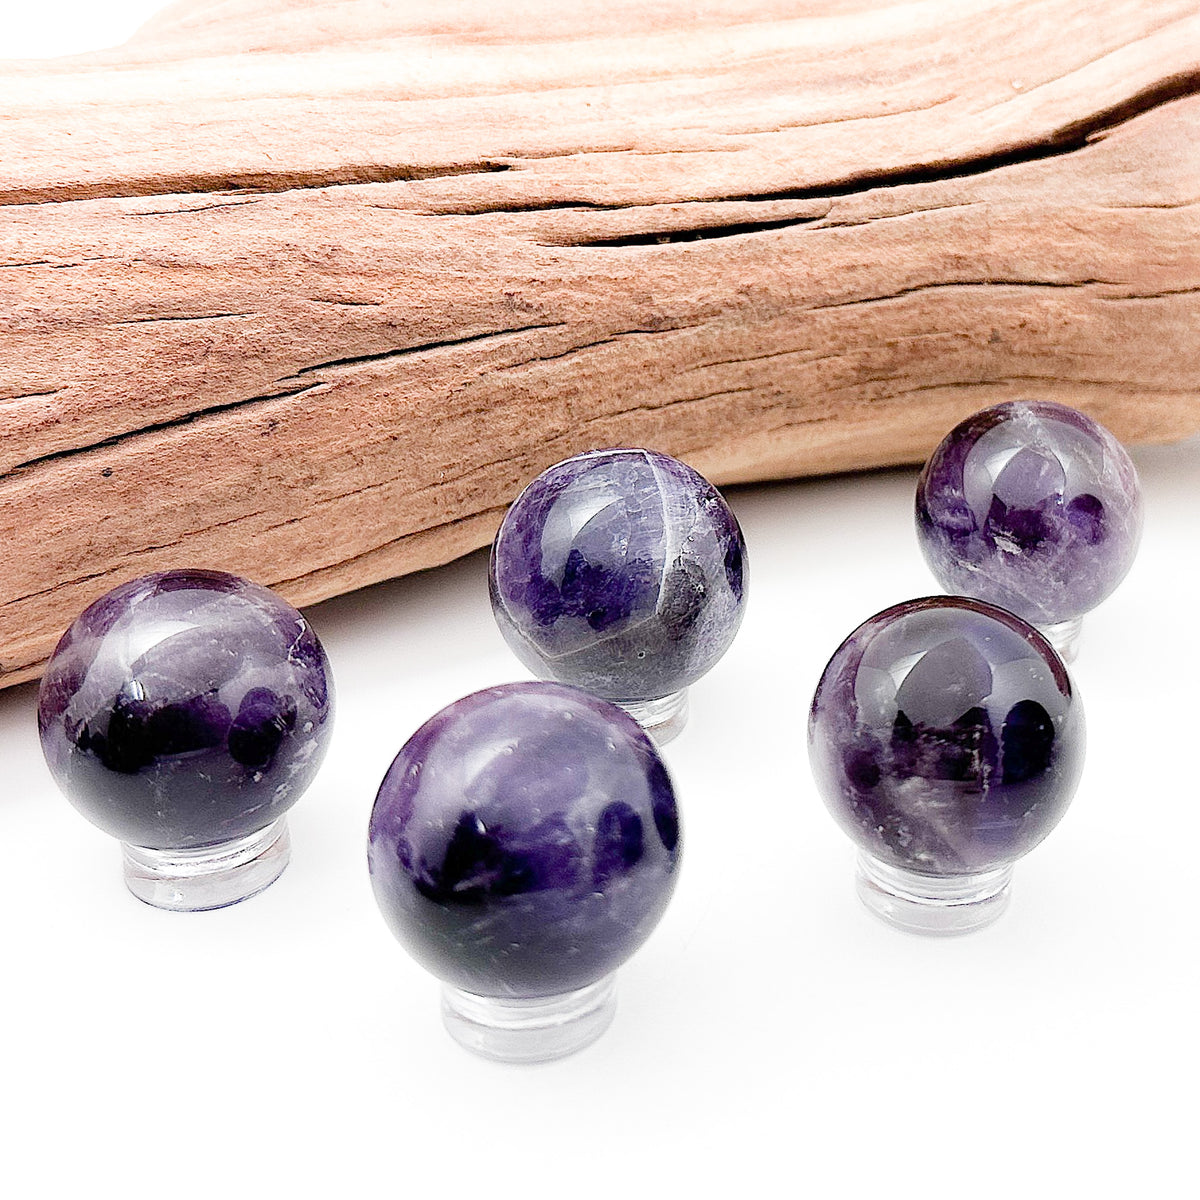 Various amethyst spheres laid in a group against a white background